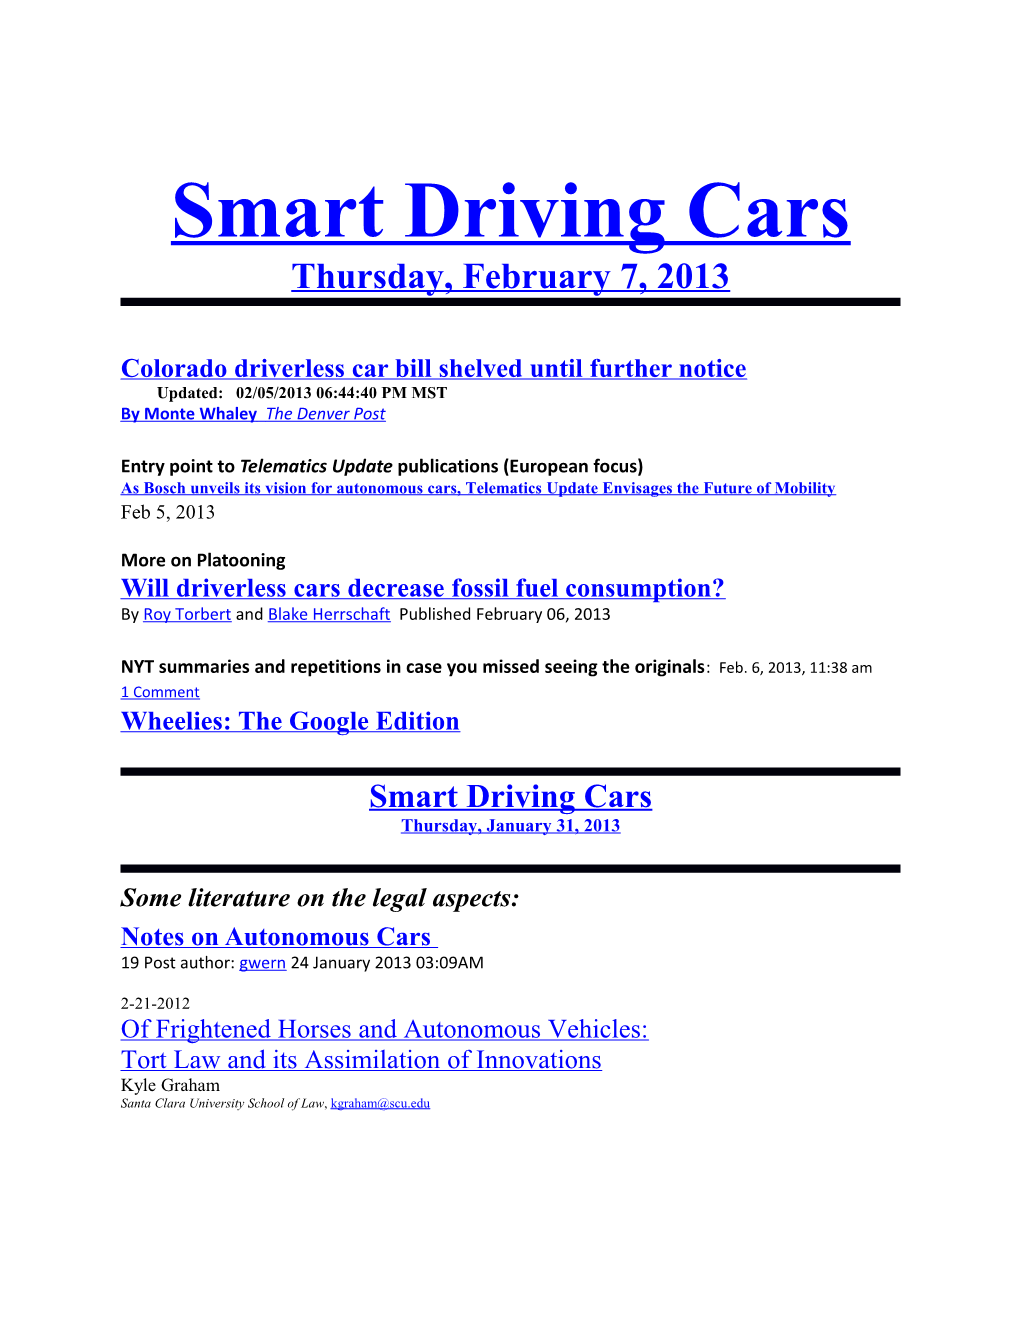 Colorado Driverless Car Bill Shelved Until Further Noticeupdated: 02/05/2013 06:44:40 PM MST